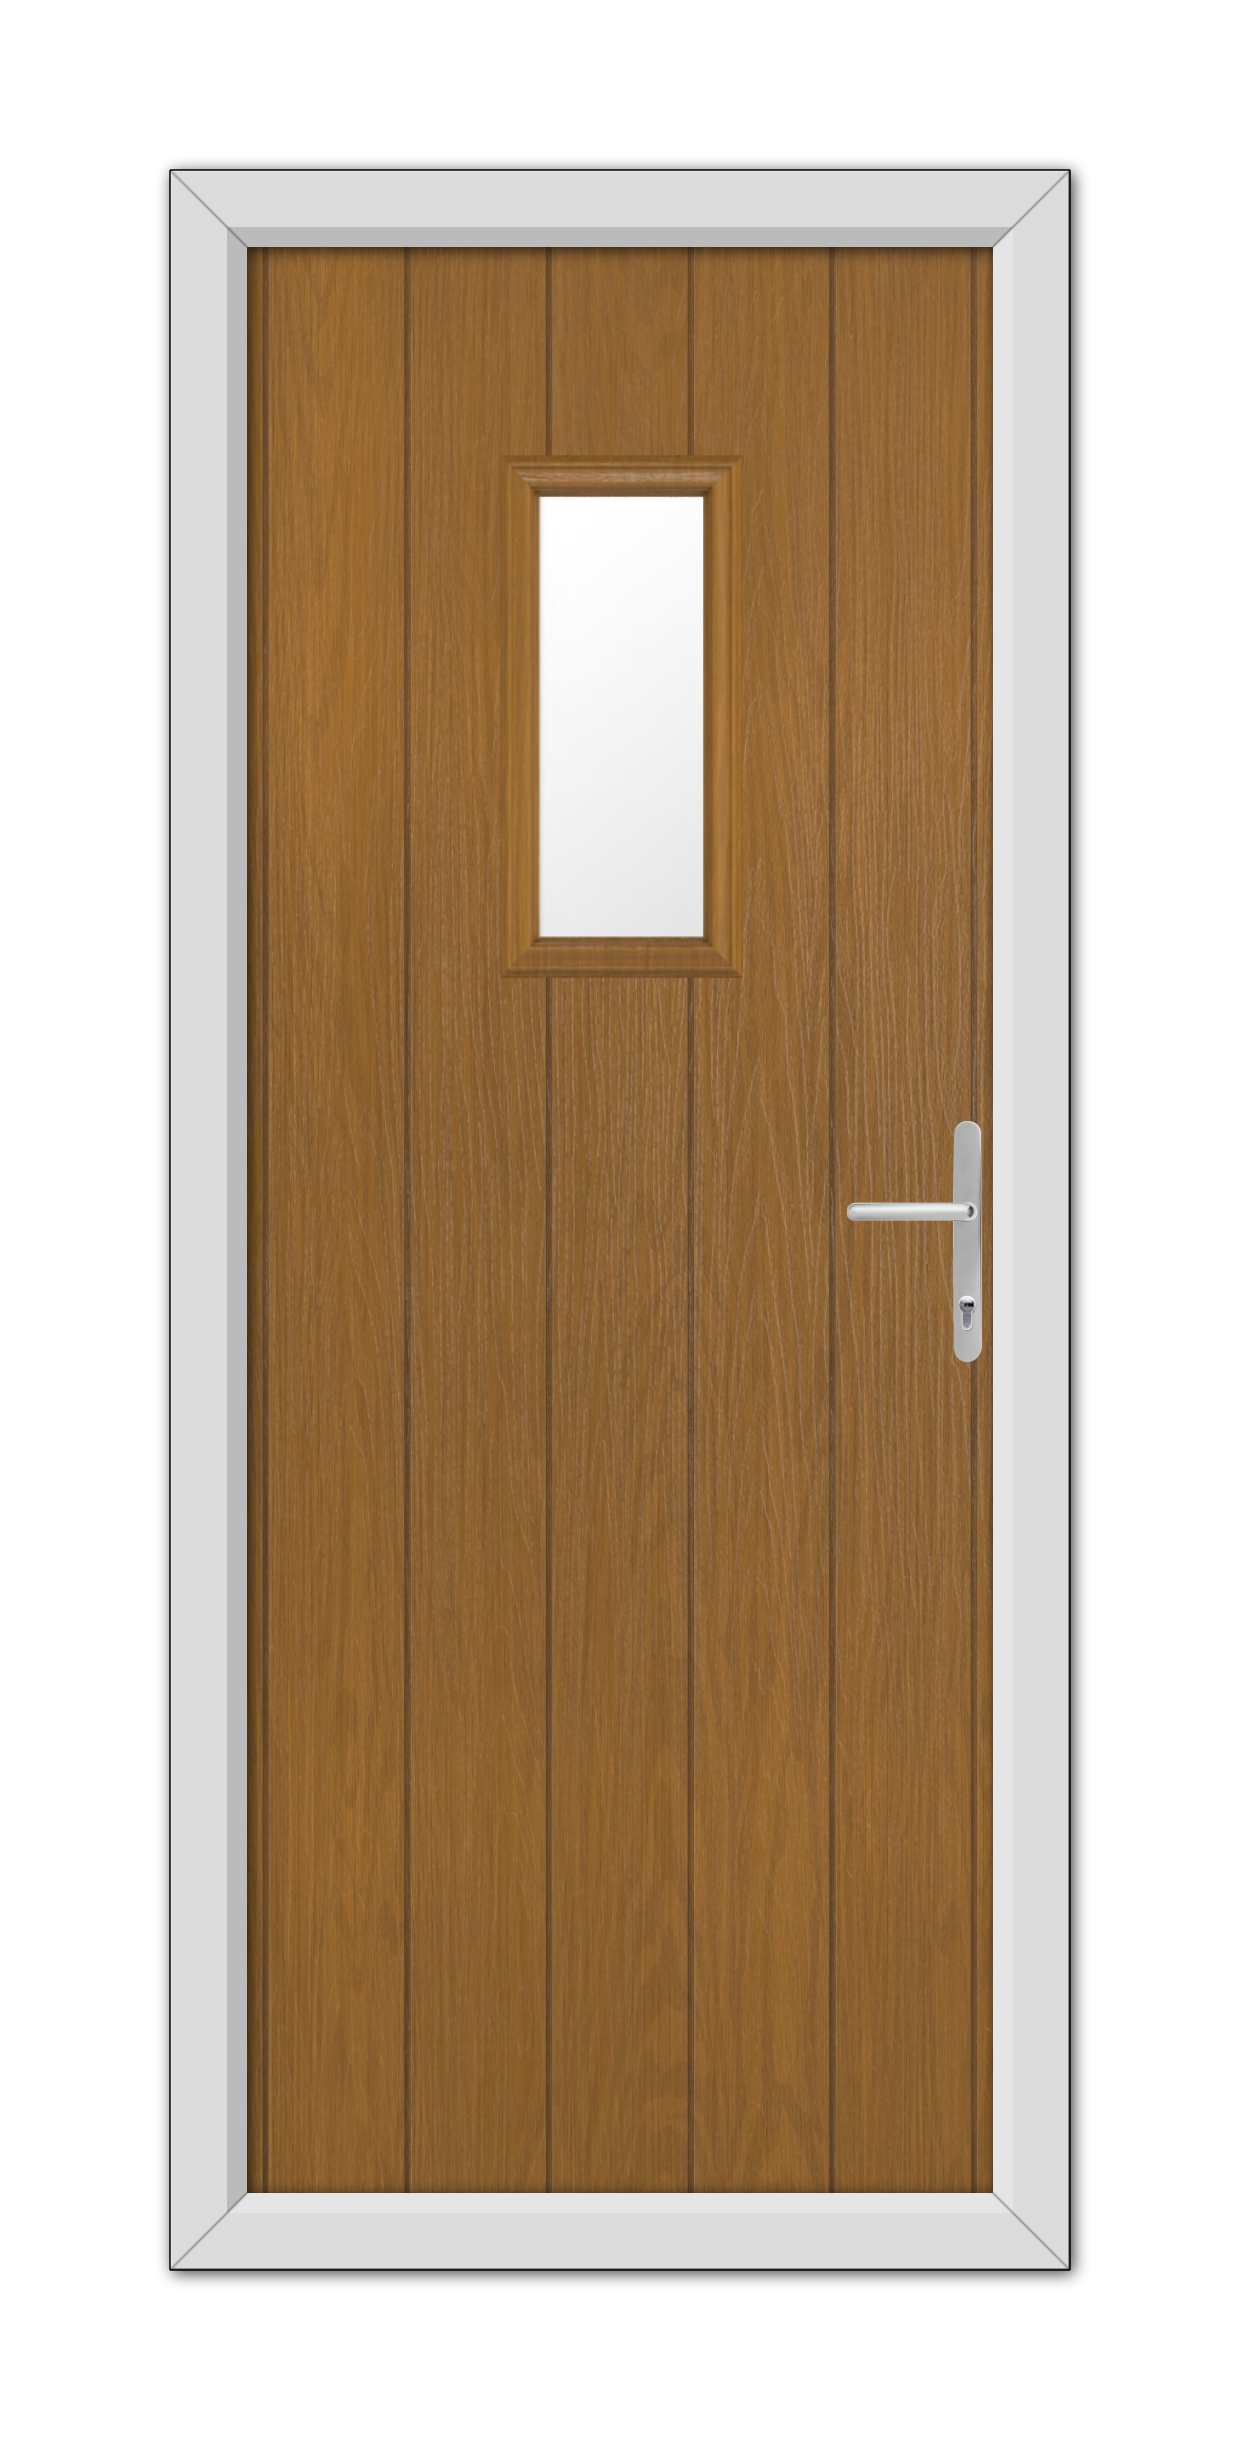 A Oak Somerset Composite Door 48mm Timber Core with a white frame, featuring a small square window and a modern handle, set against a white background.